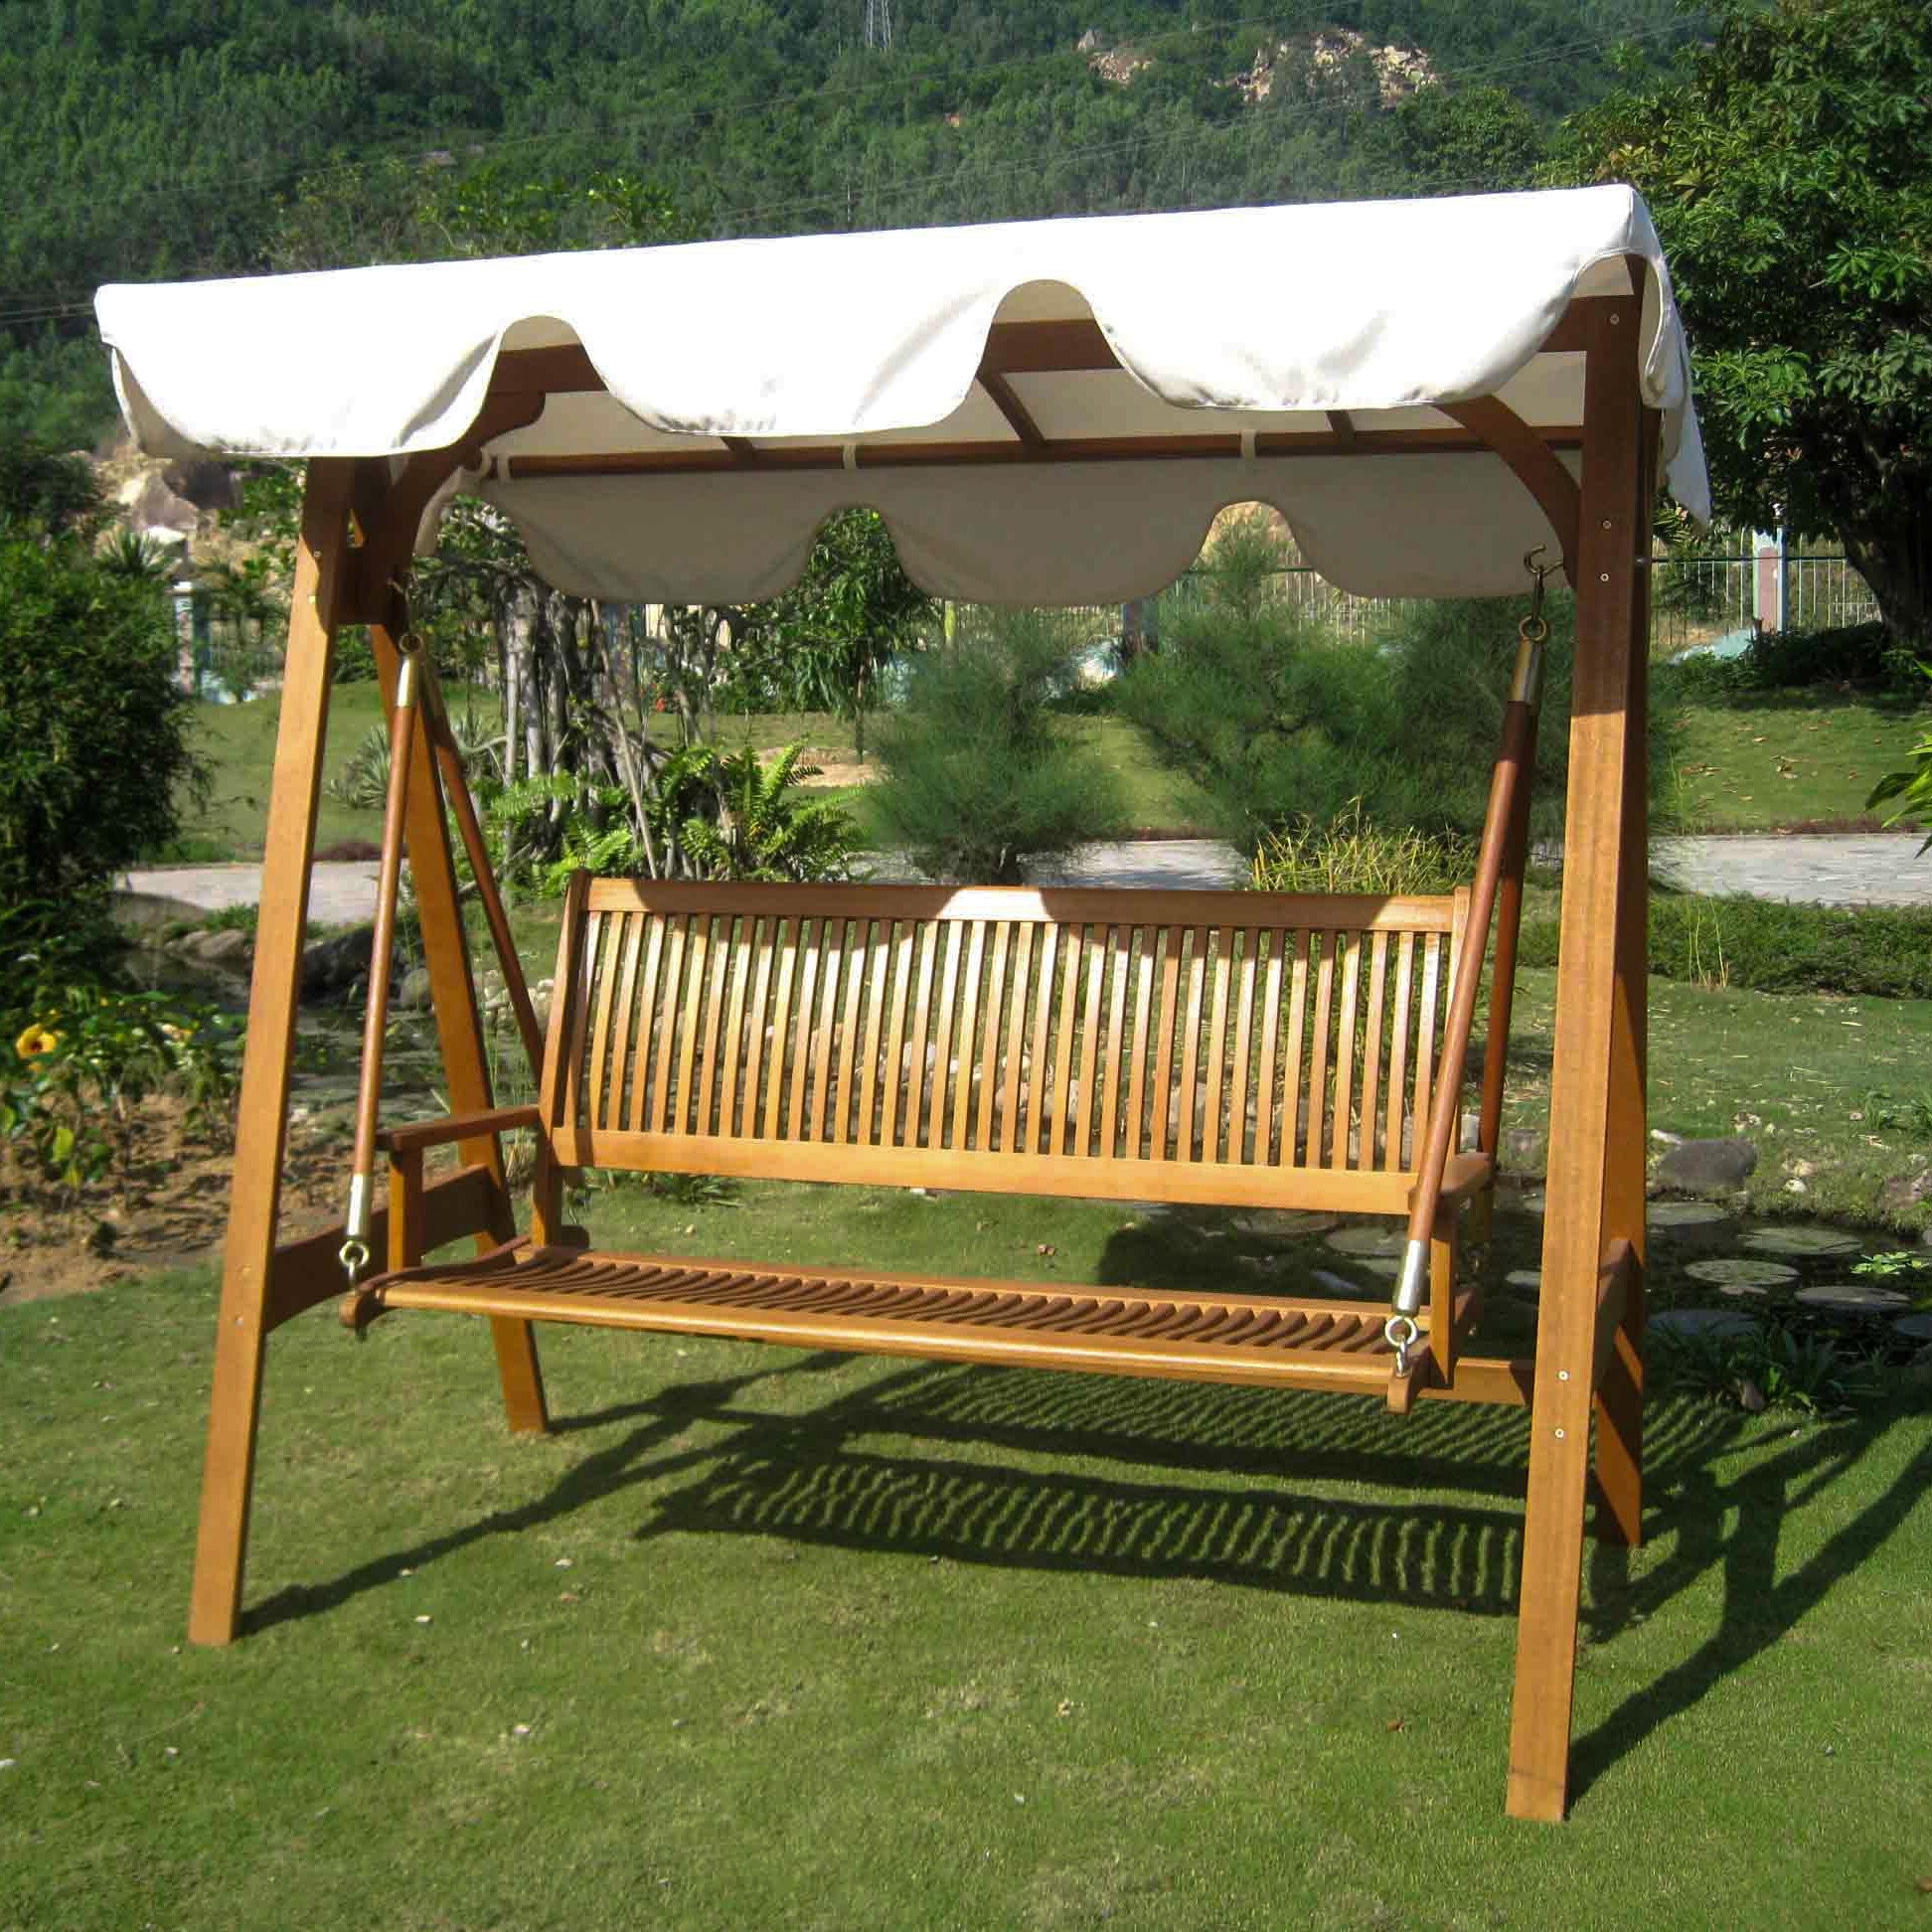 Free Standing Porch Swing Visualhunt, Wooden Lawn Swings With Canopy